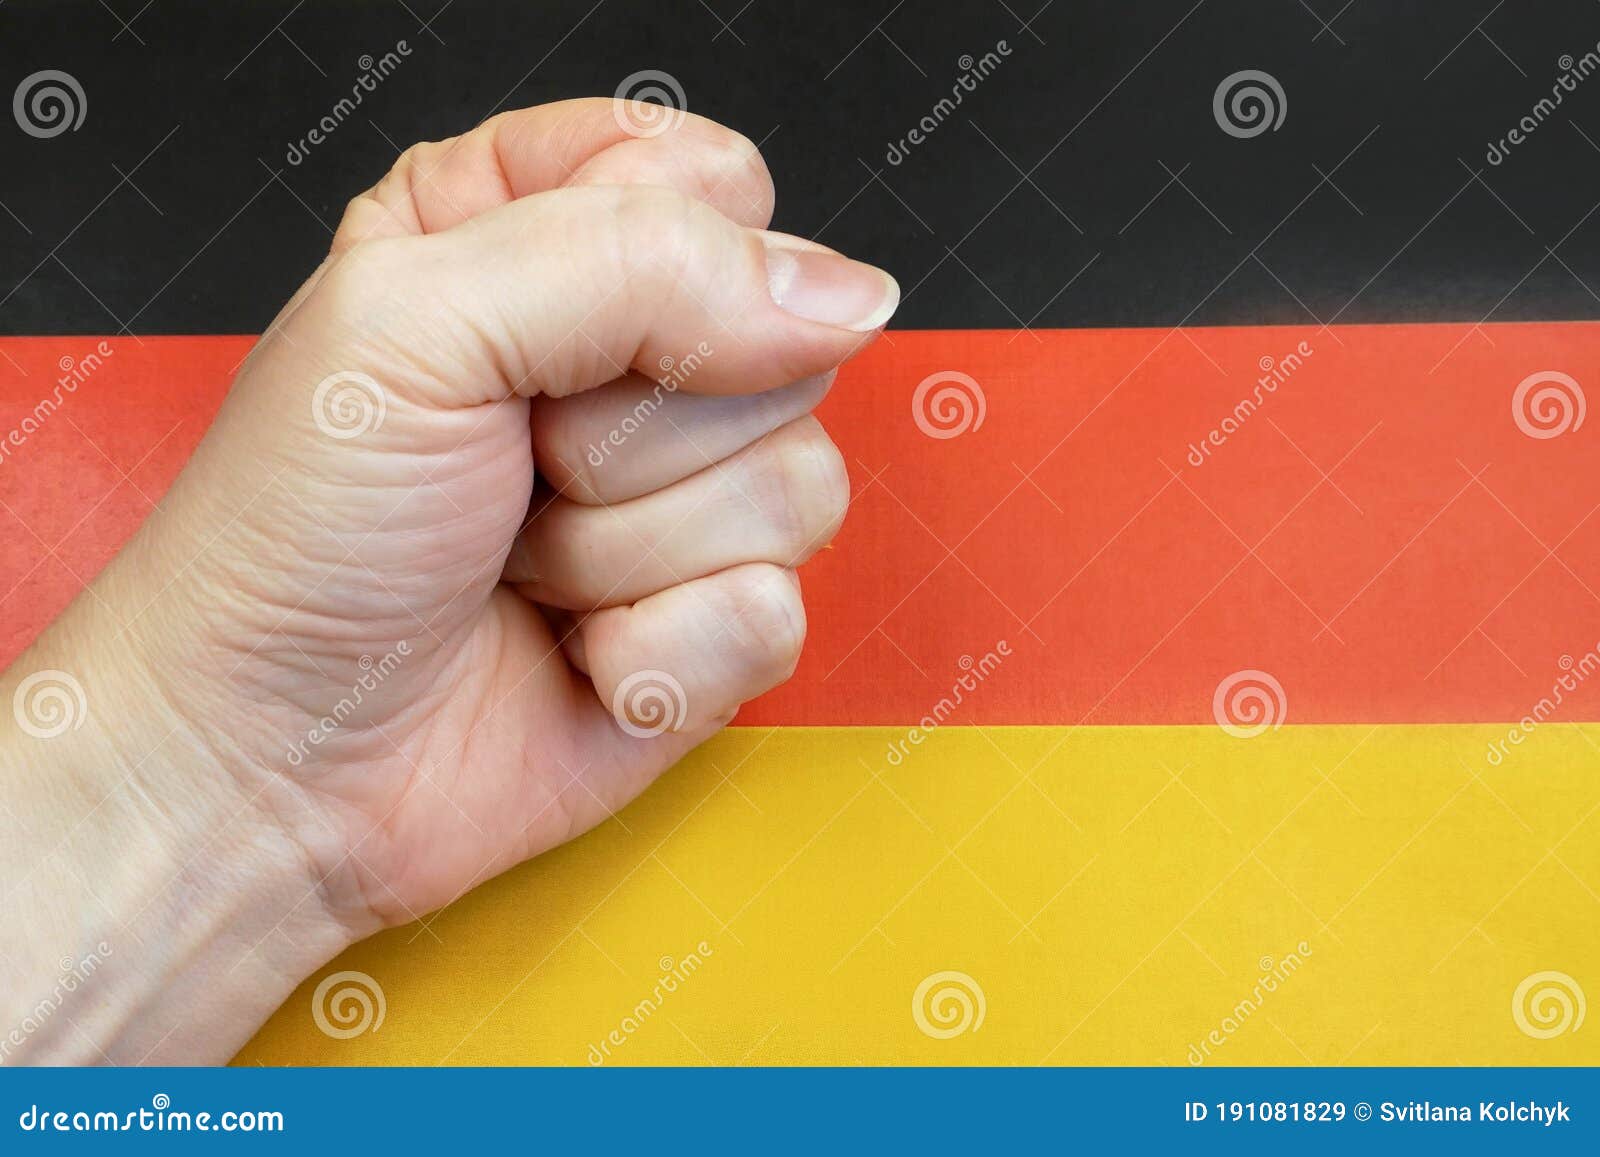 Fisting pictures from germany